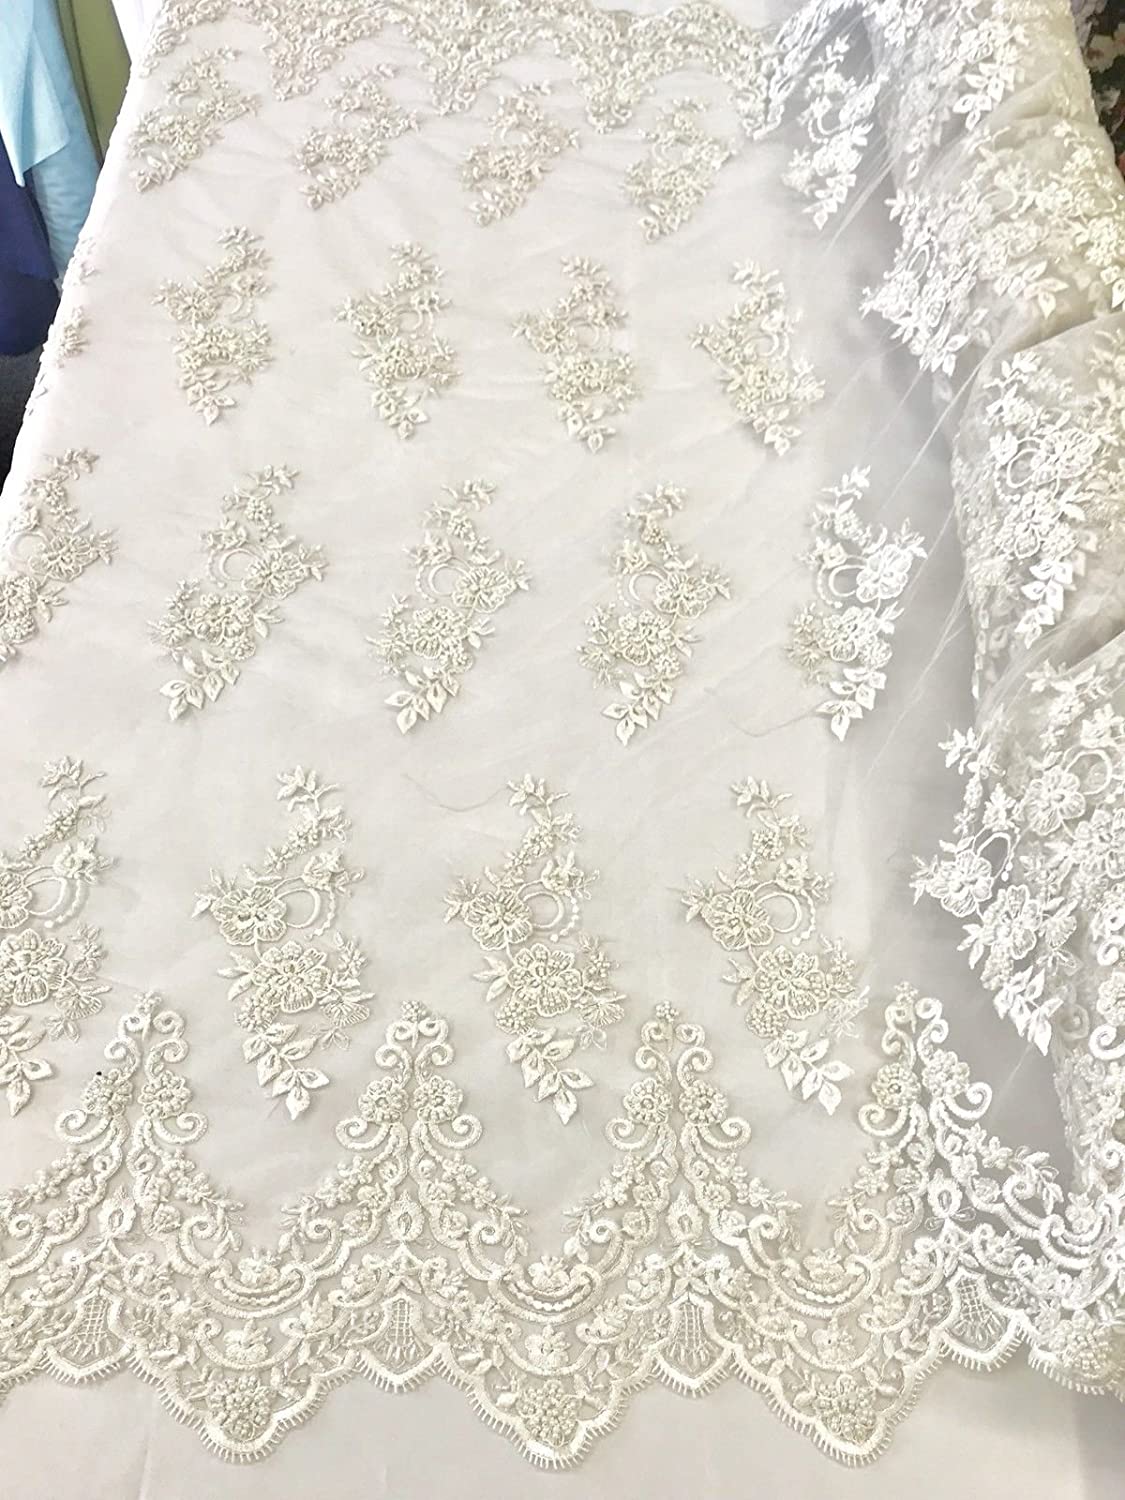 DIAMOND WHITE HAND BEADED FLORAL DESIGN EMBROIDERY ON A MESH LACE-SOLD BY YARD.